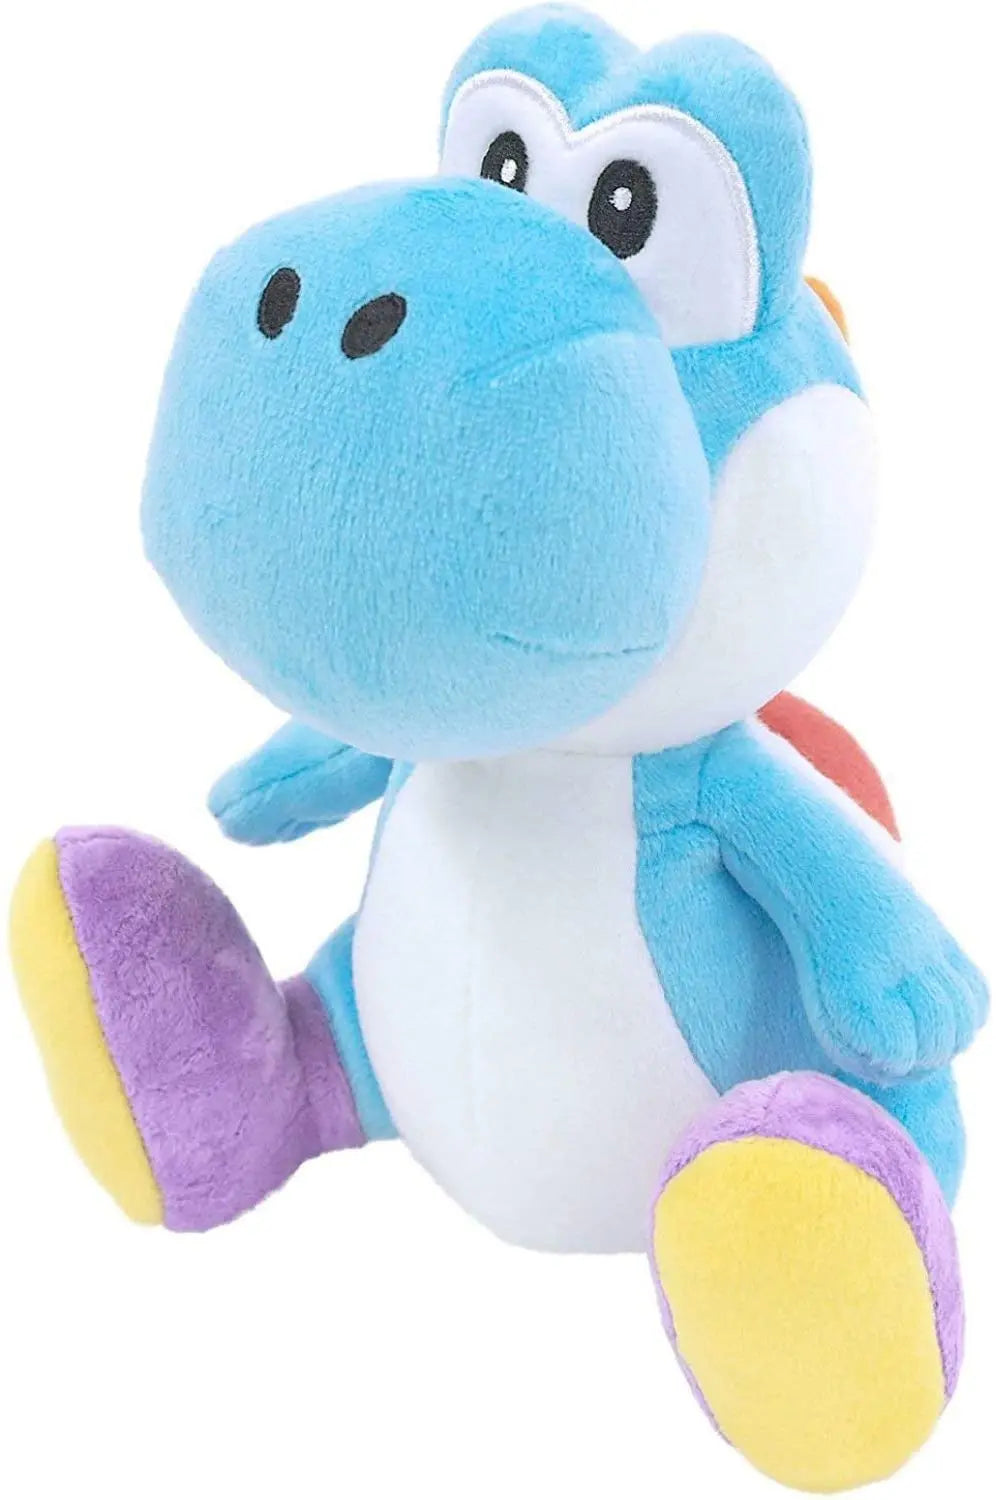 Little Buddy Super Mario All Star Collection 7" Light Blue Yoshi Plush King Gaming